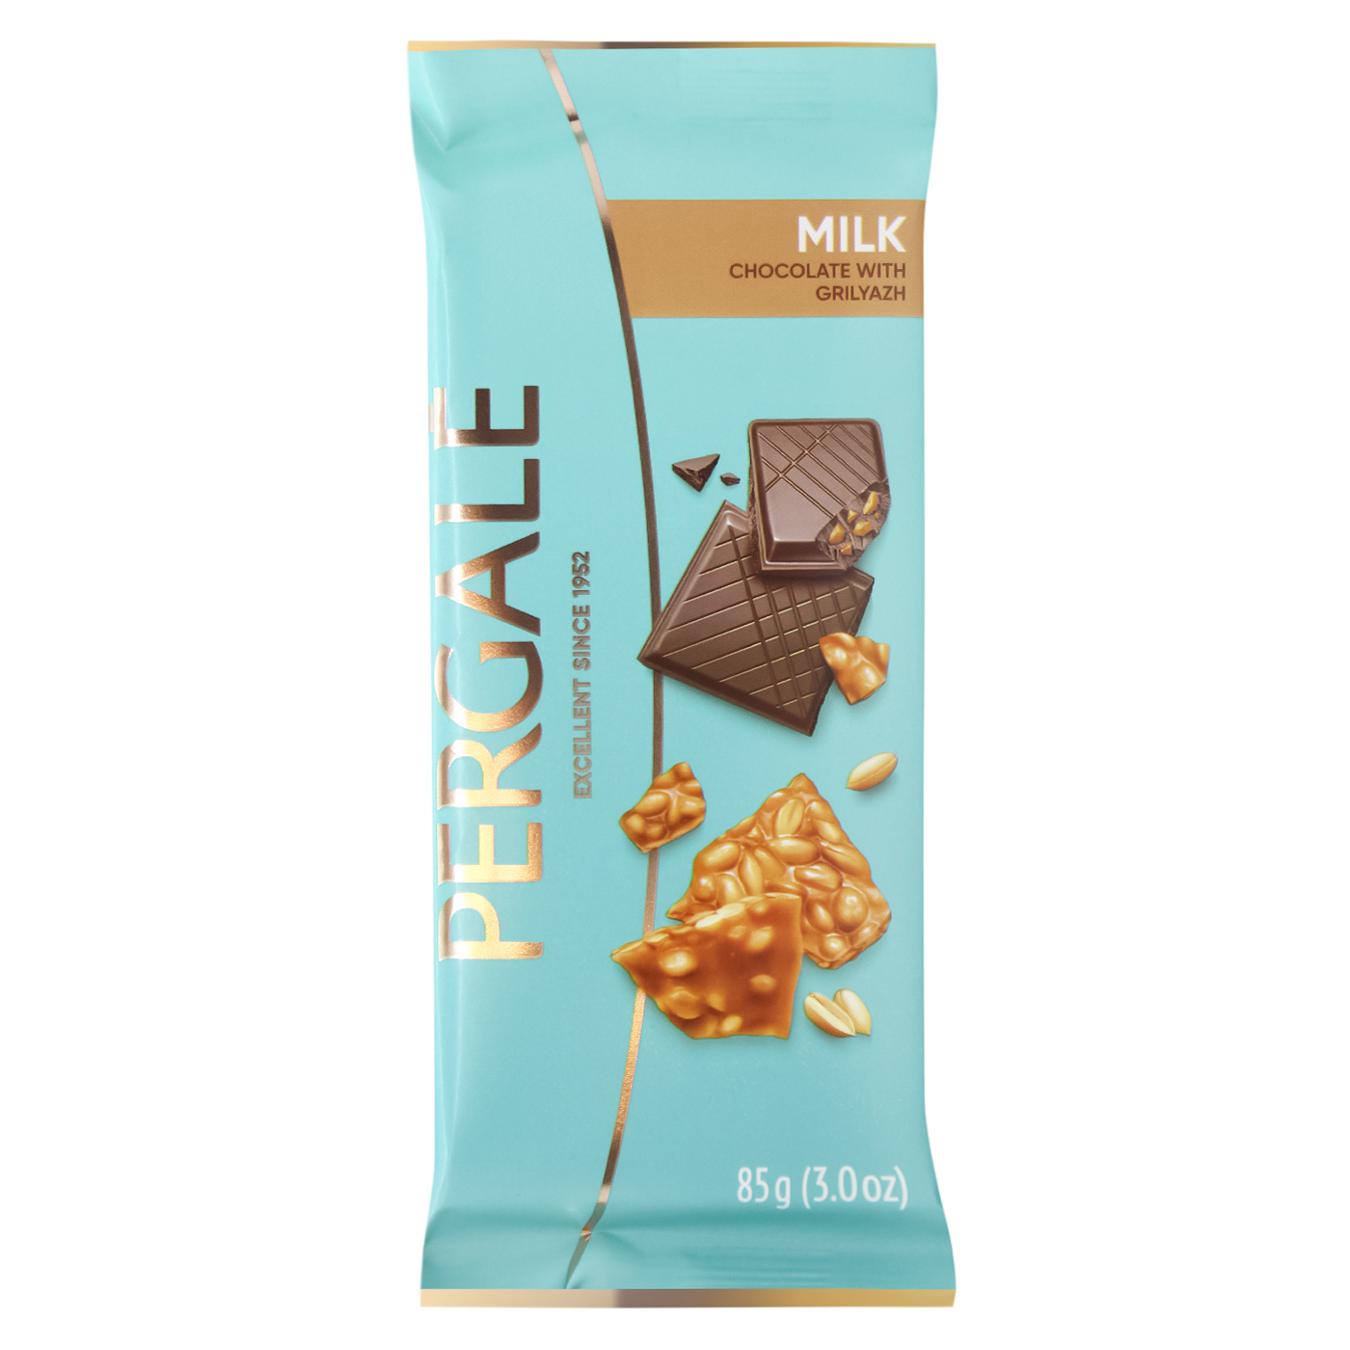 Pergale milk chocolate with crushed nuts 85g